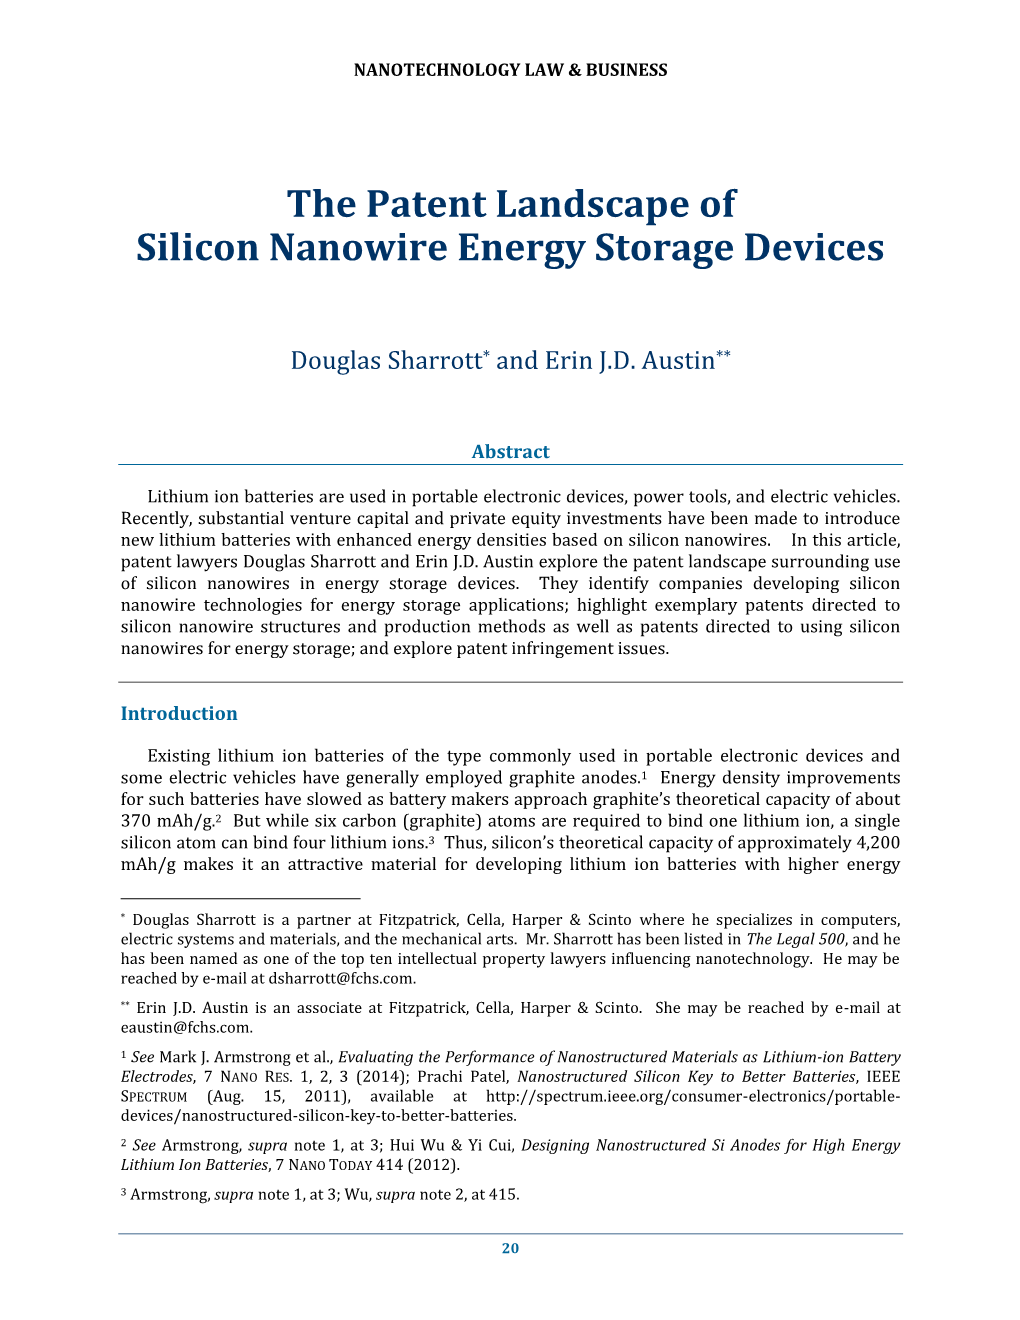 The Patent Landscape of Silicon Nanowire Energy Storage Devices